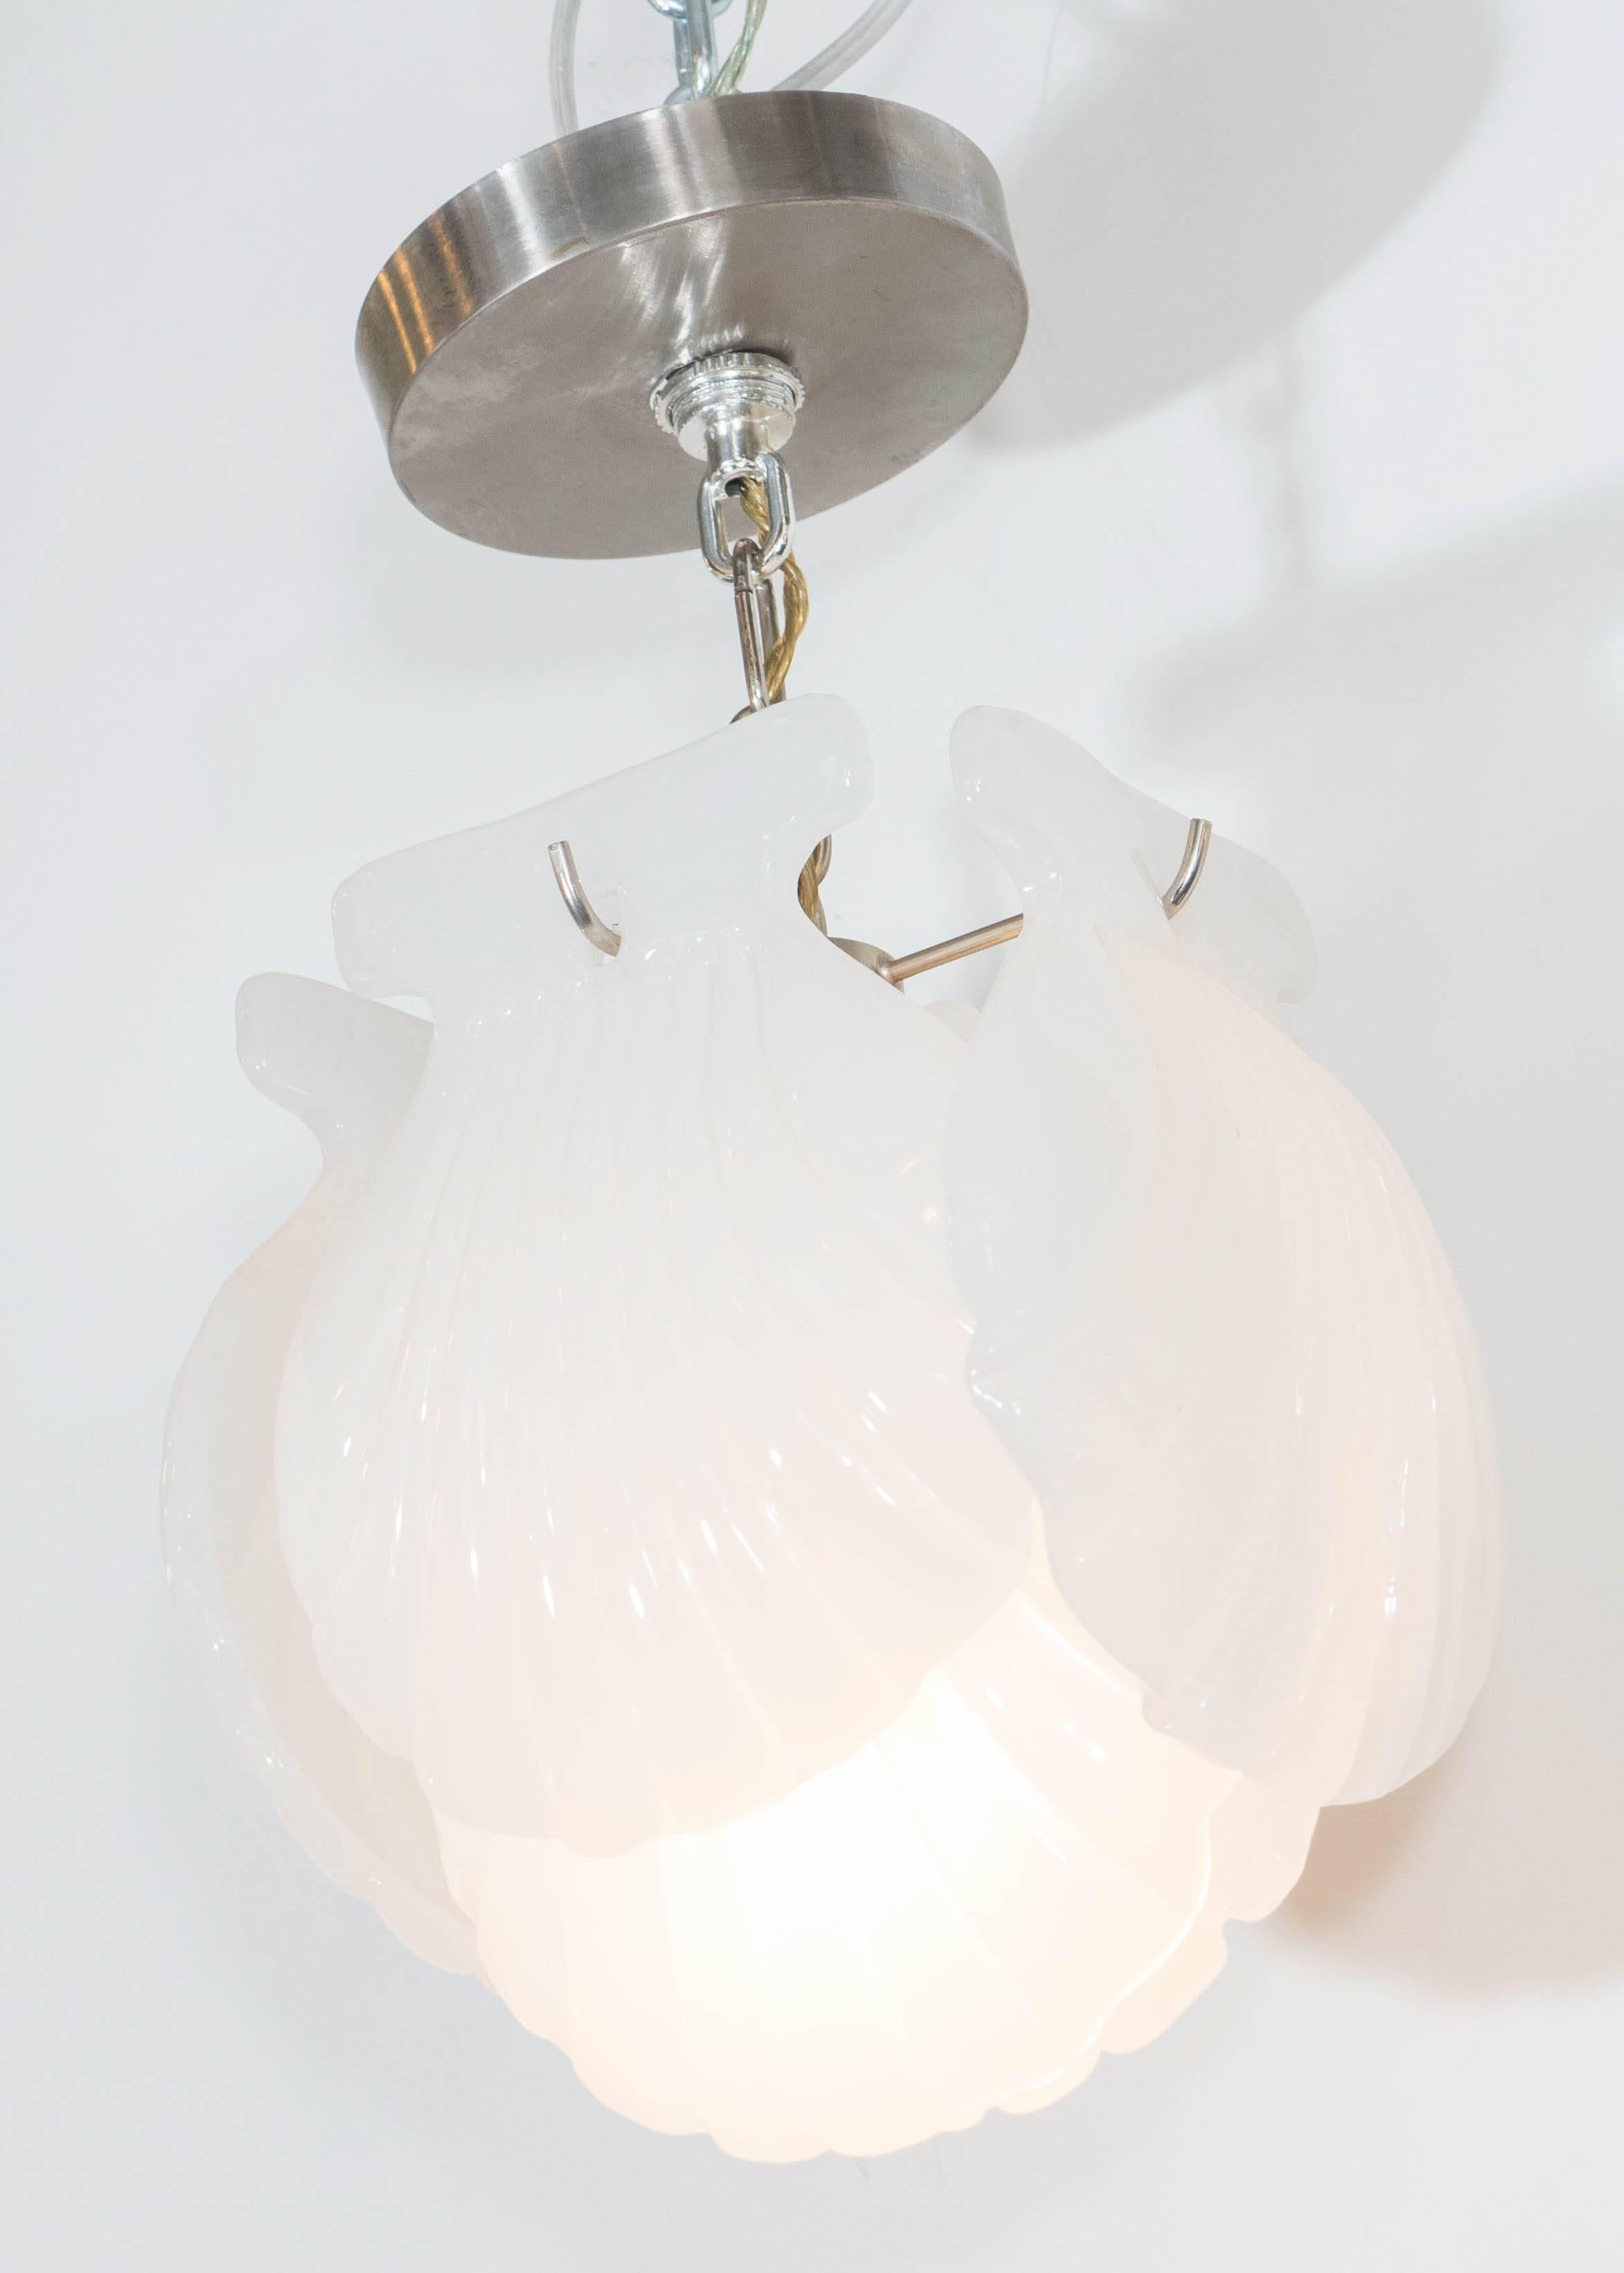 An Italian pendant light, with six white opalescent scallop shells in Murano glass, produced circa 1960s, each suspended in layers from a metal frame and circular canopy. Wiring and socket to US standard, requires a single Edison base bulb. This